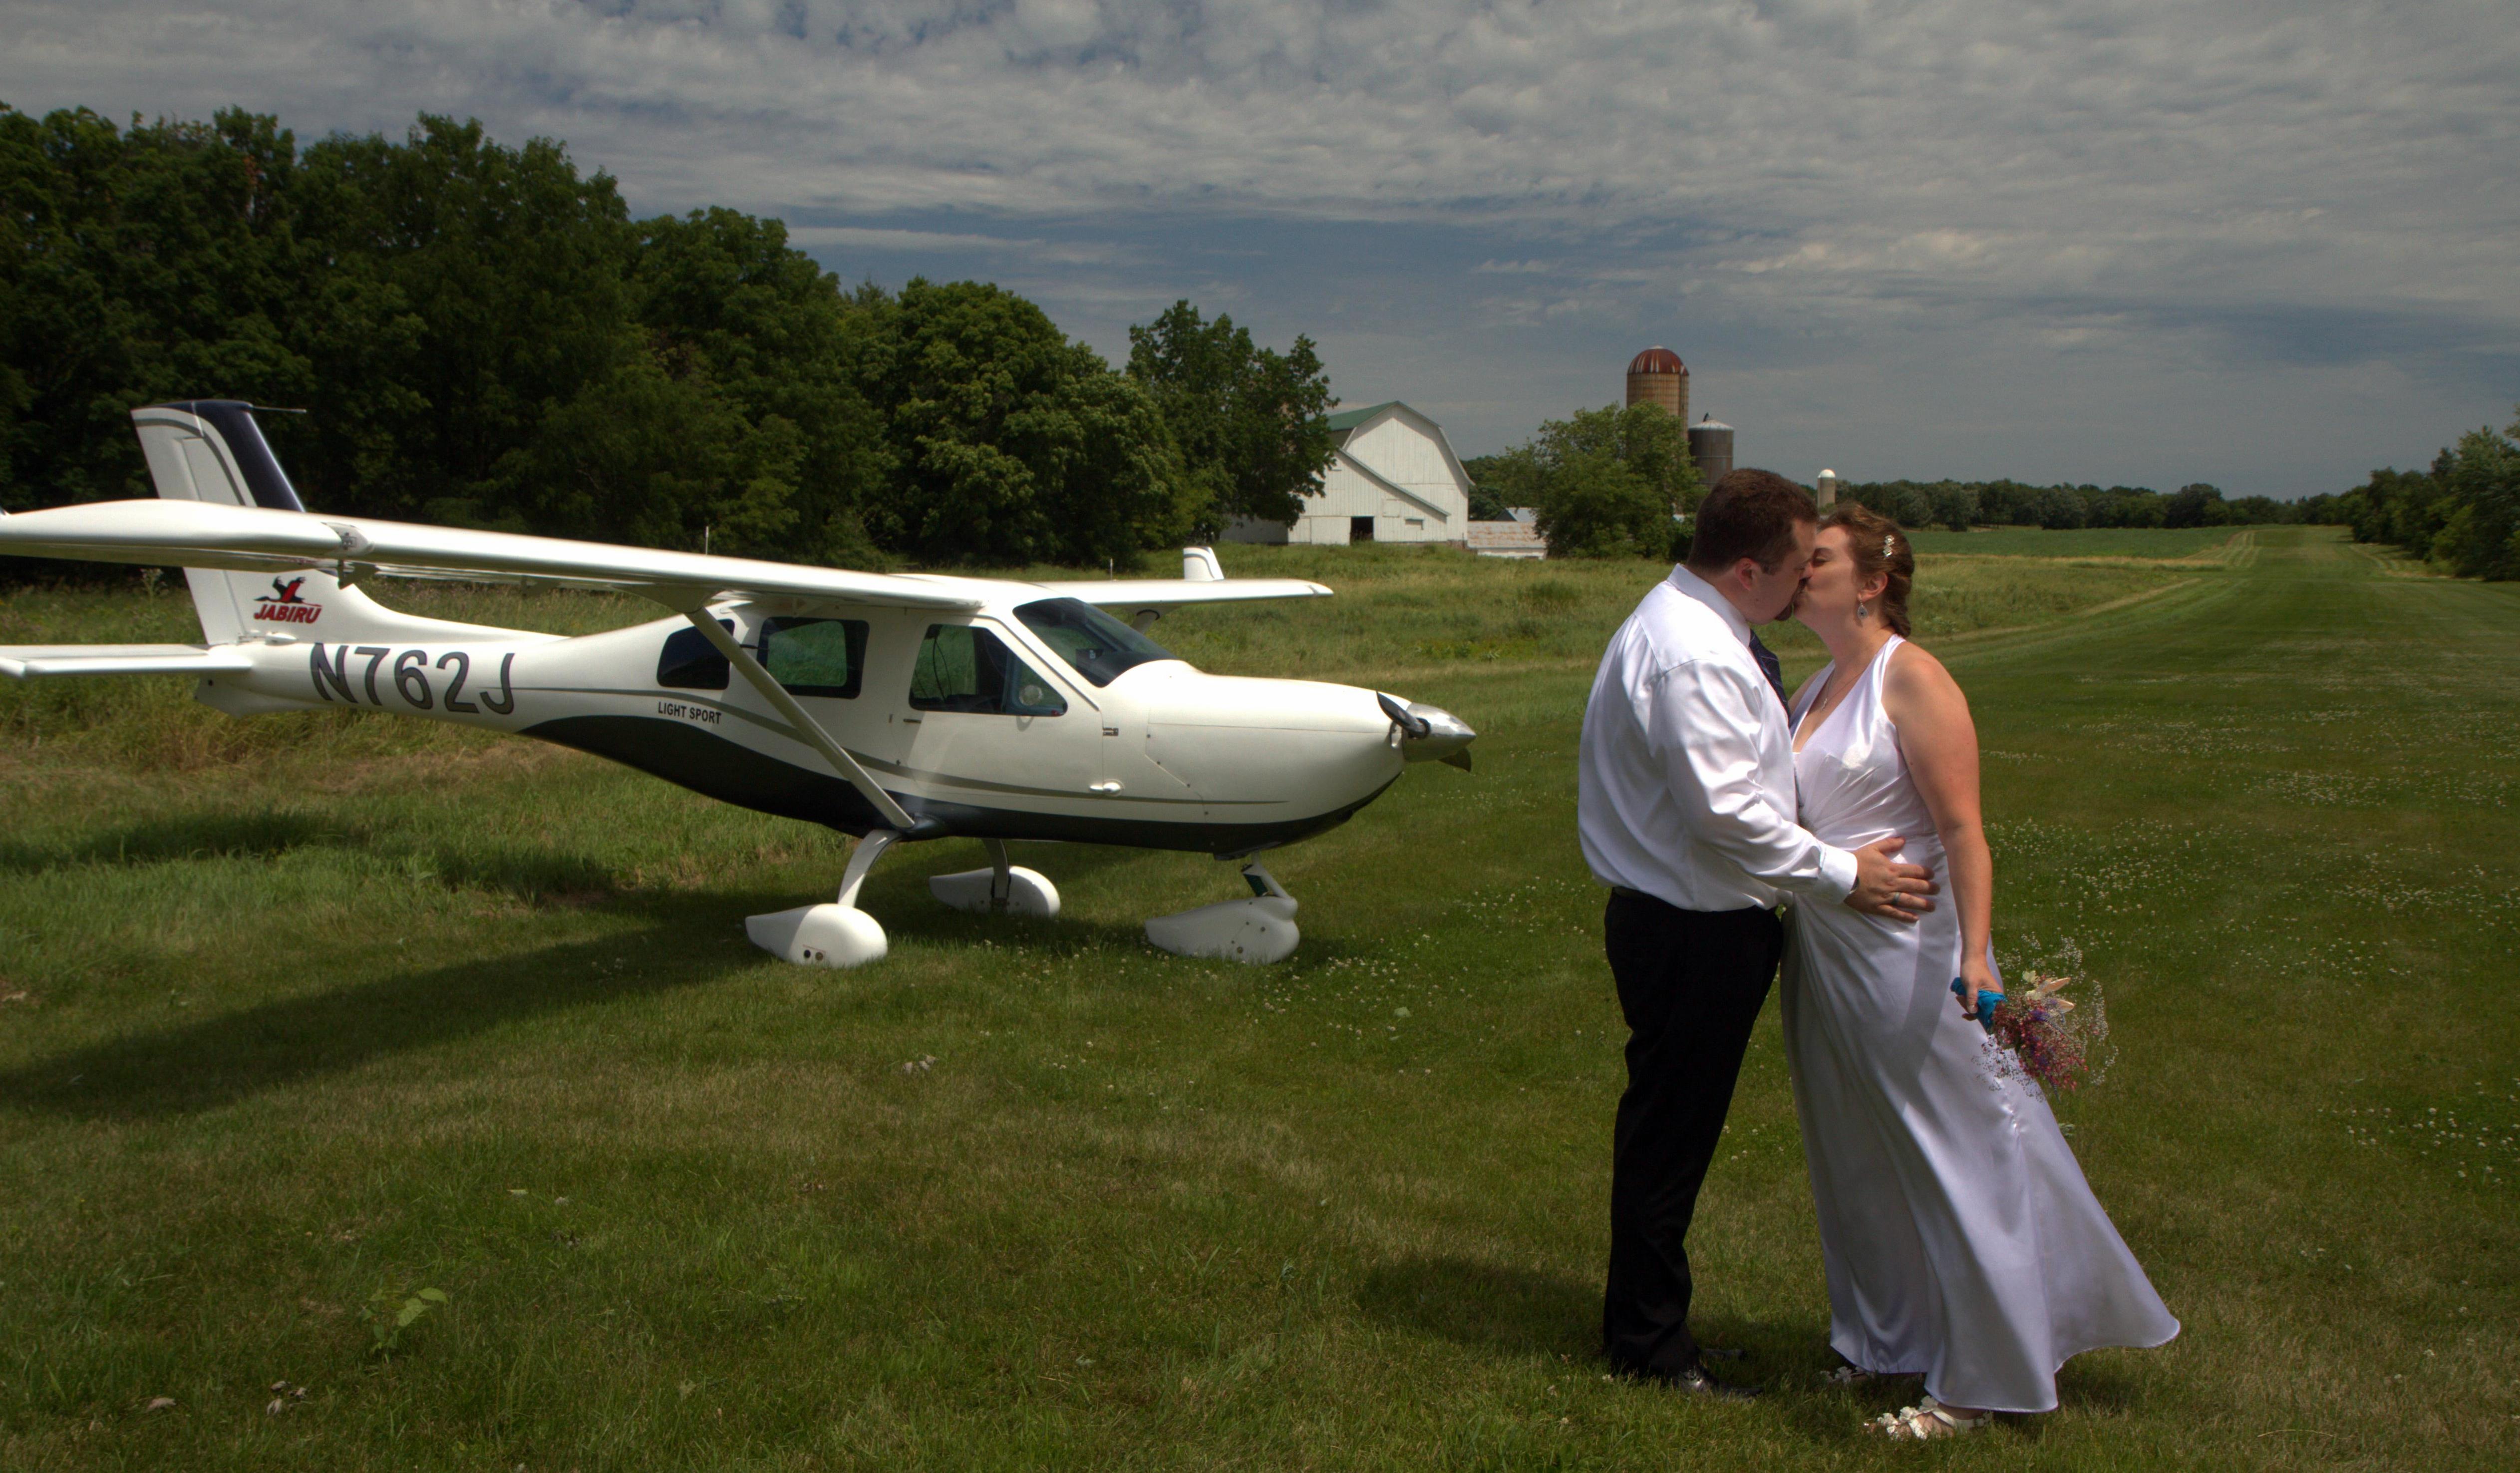 A kiss before taking off for AirVenture. As the field was under the Fiske Approach, the couple coordinated their flight with a supportive ATC. (Photo: Aaron Hoffman)